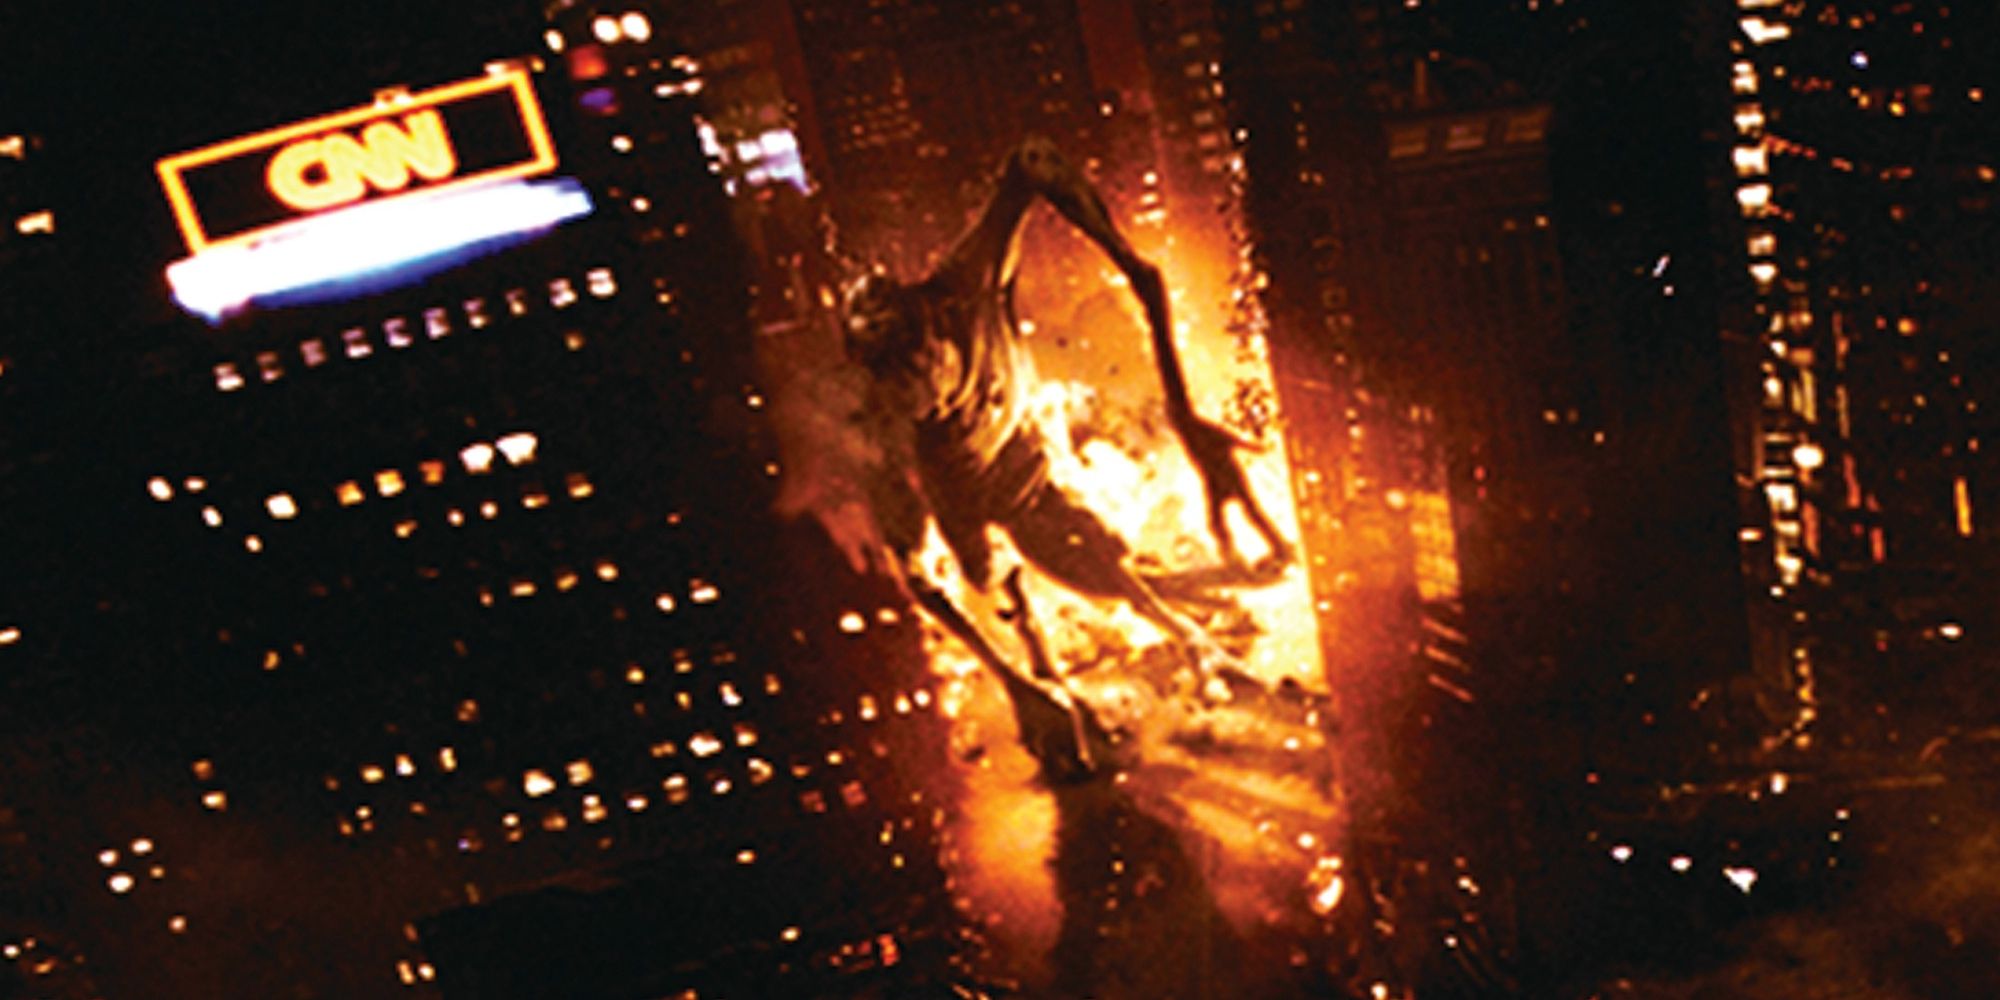 News footage of the Cloverfield monster attacking a city from above